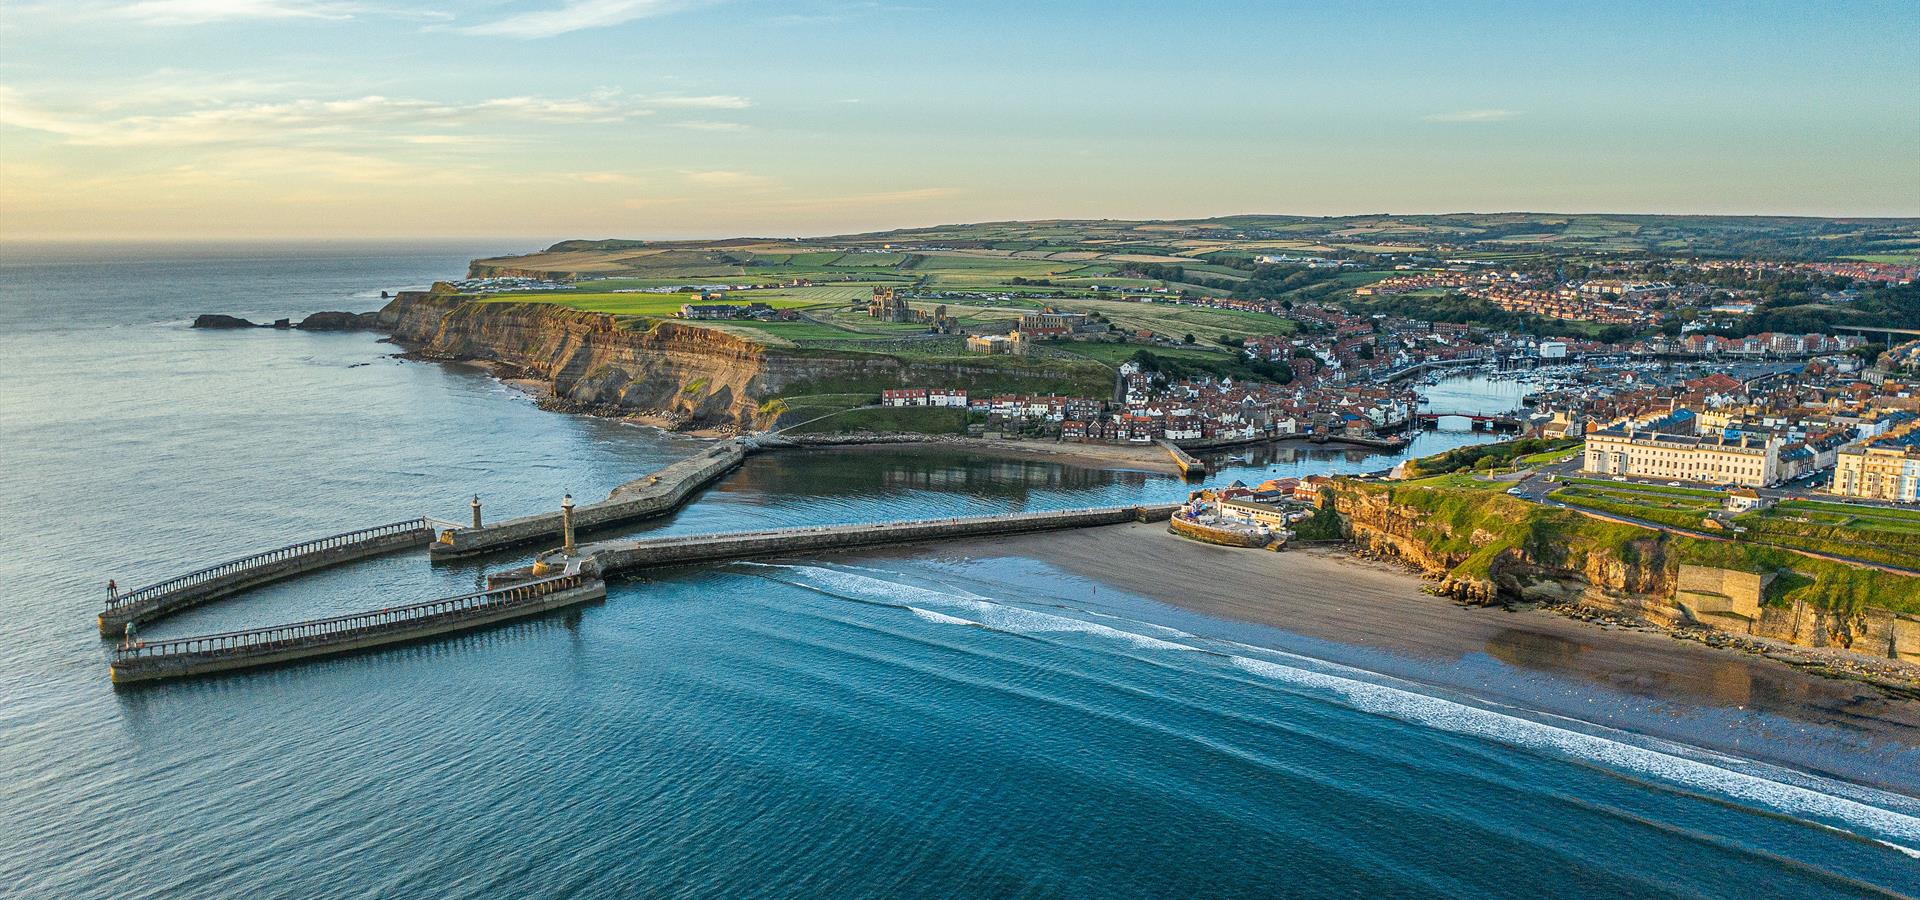 An image of Whitby by Charlotte Graham